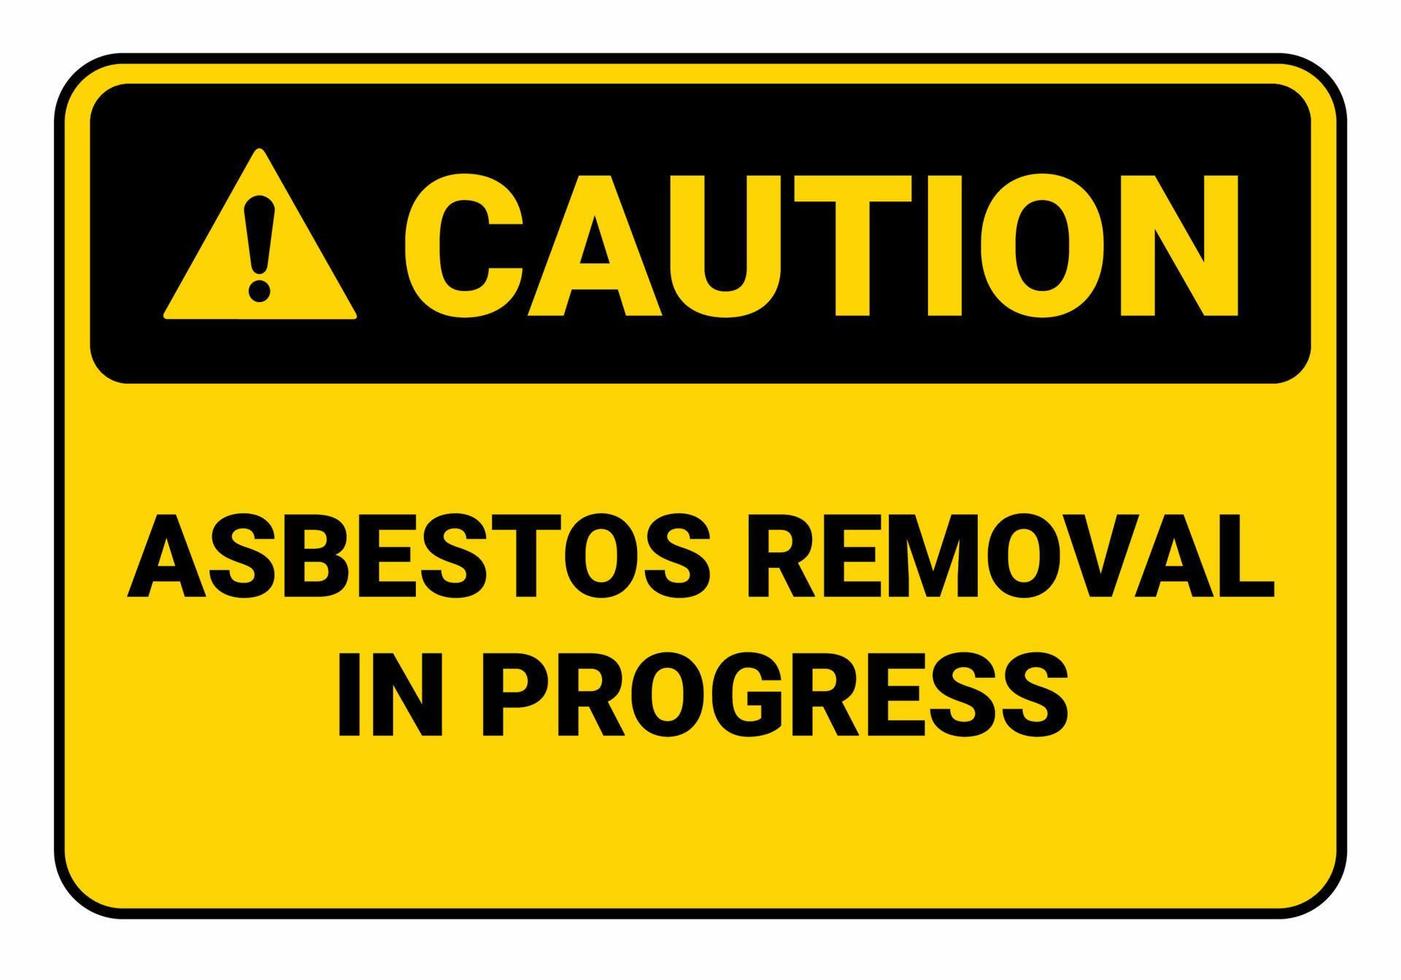 Caution Asbestos removal in progress. OSHA and ANSI standard sign. Safety sign. vector